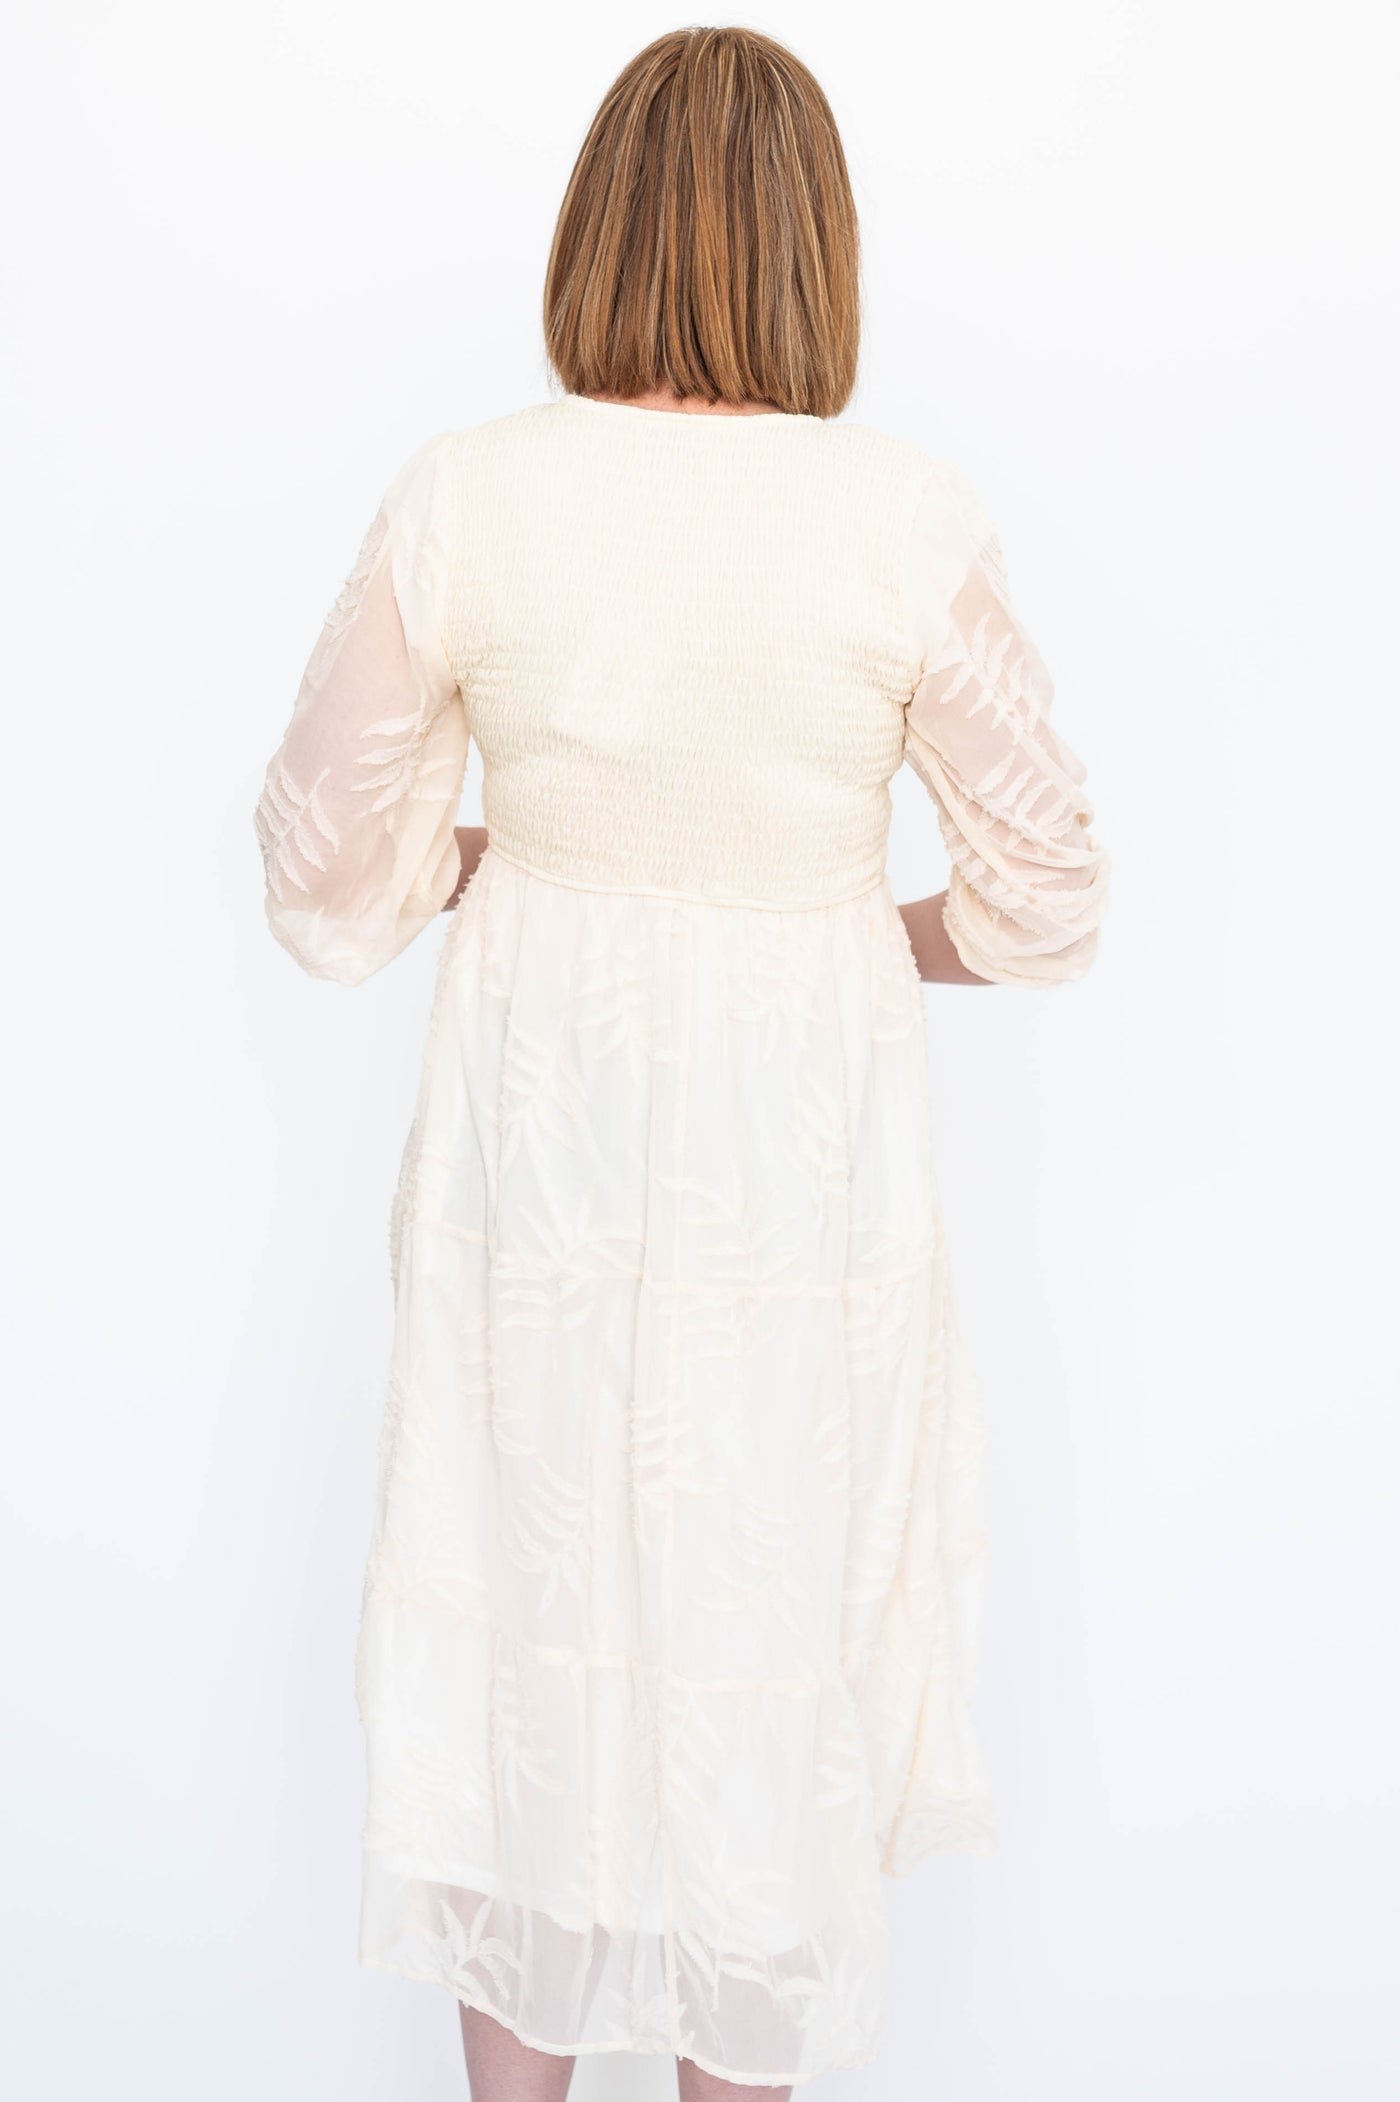 Back view of a cream dress